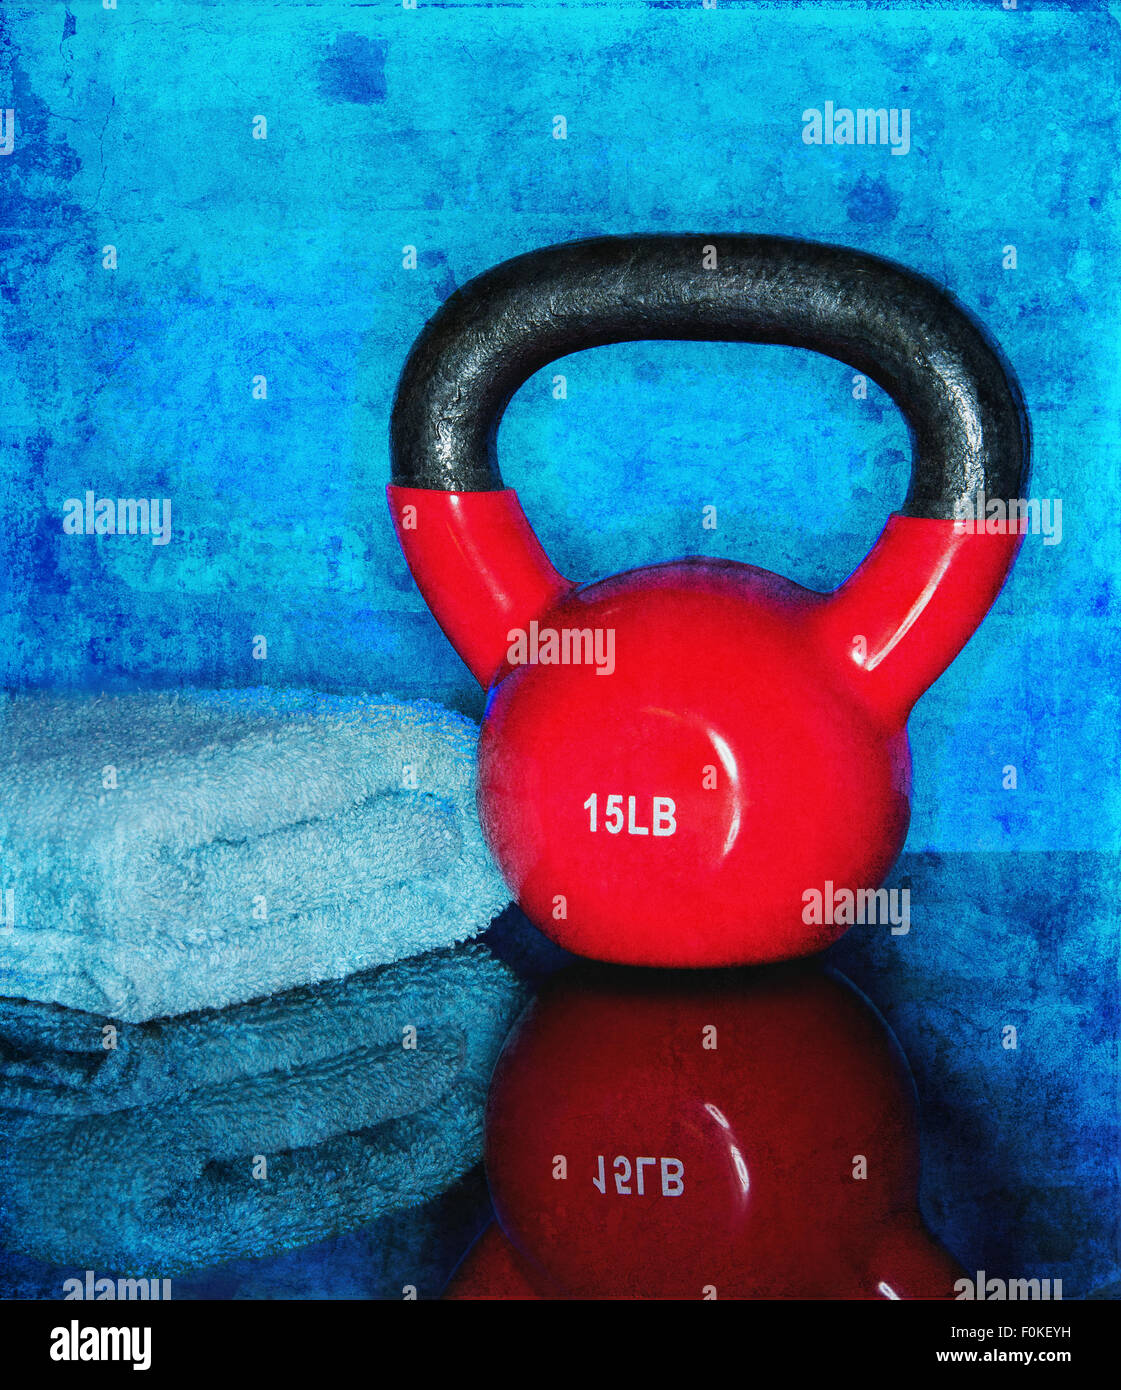 Red Kettle ball on blue background with towel Stock Photo